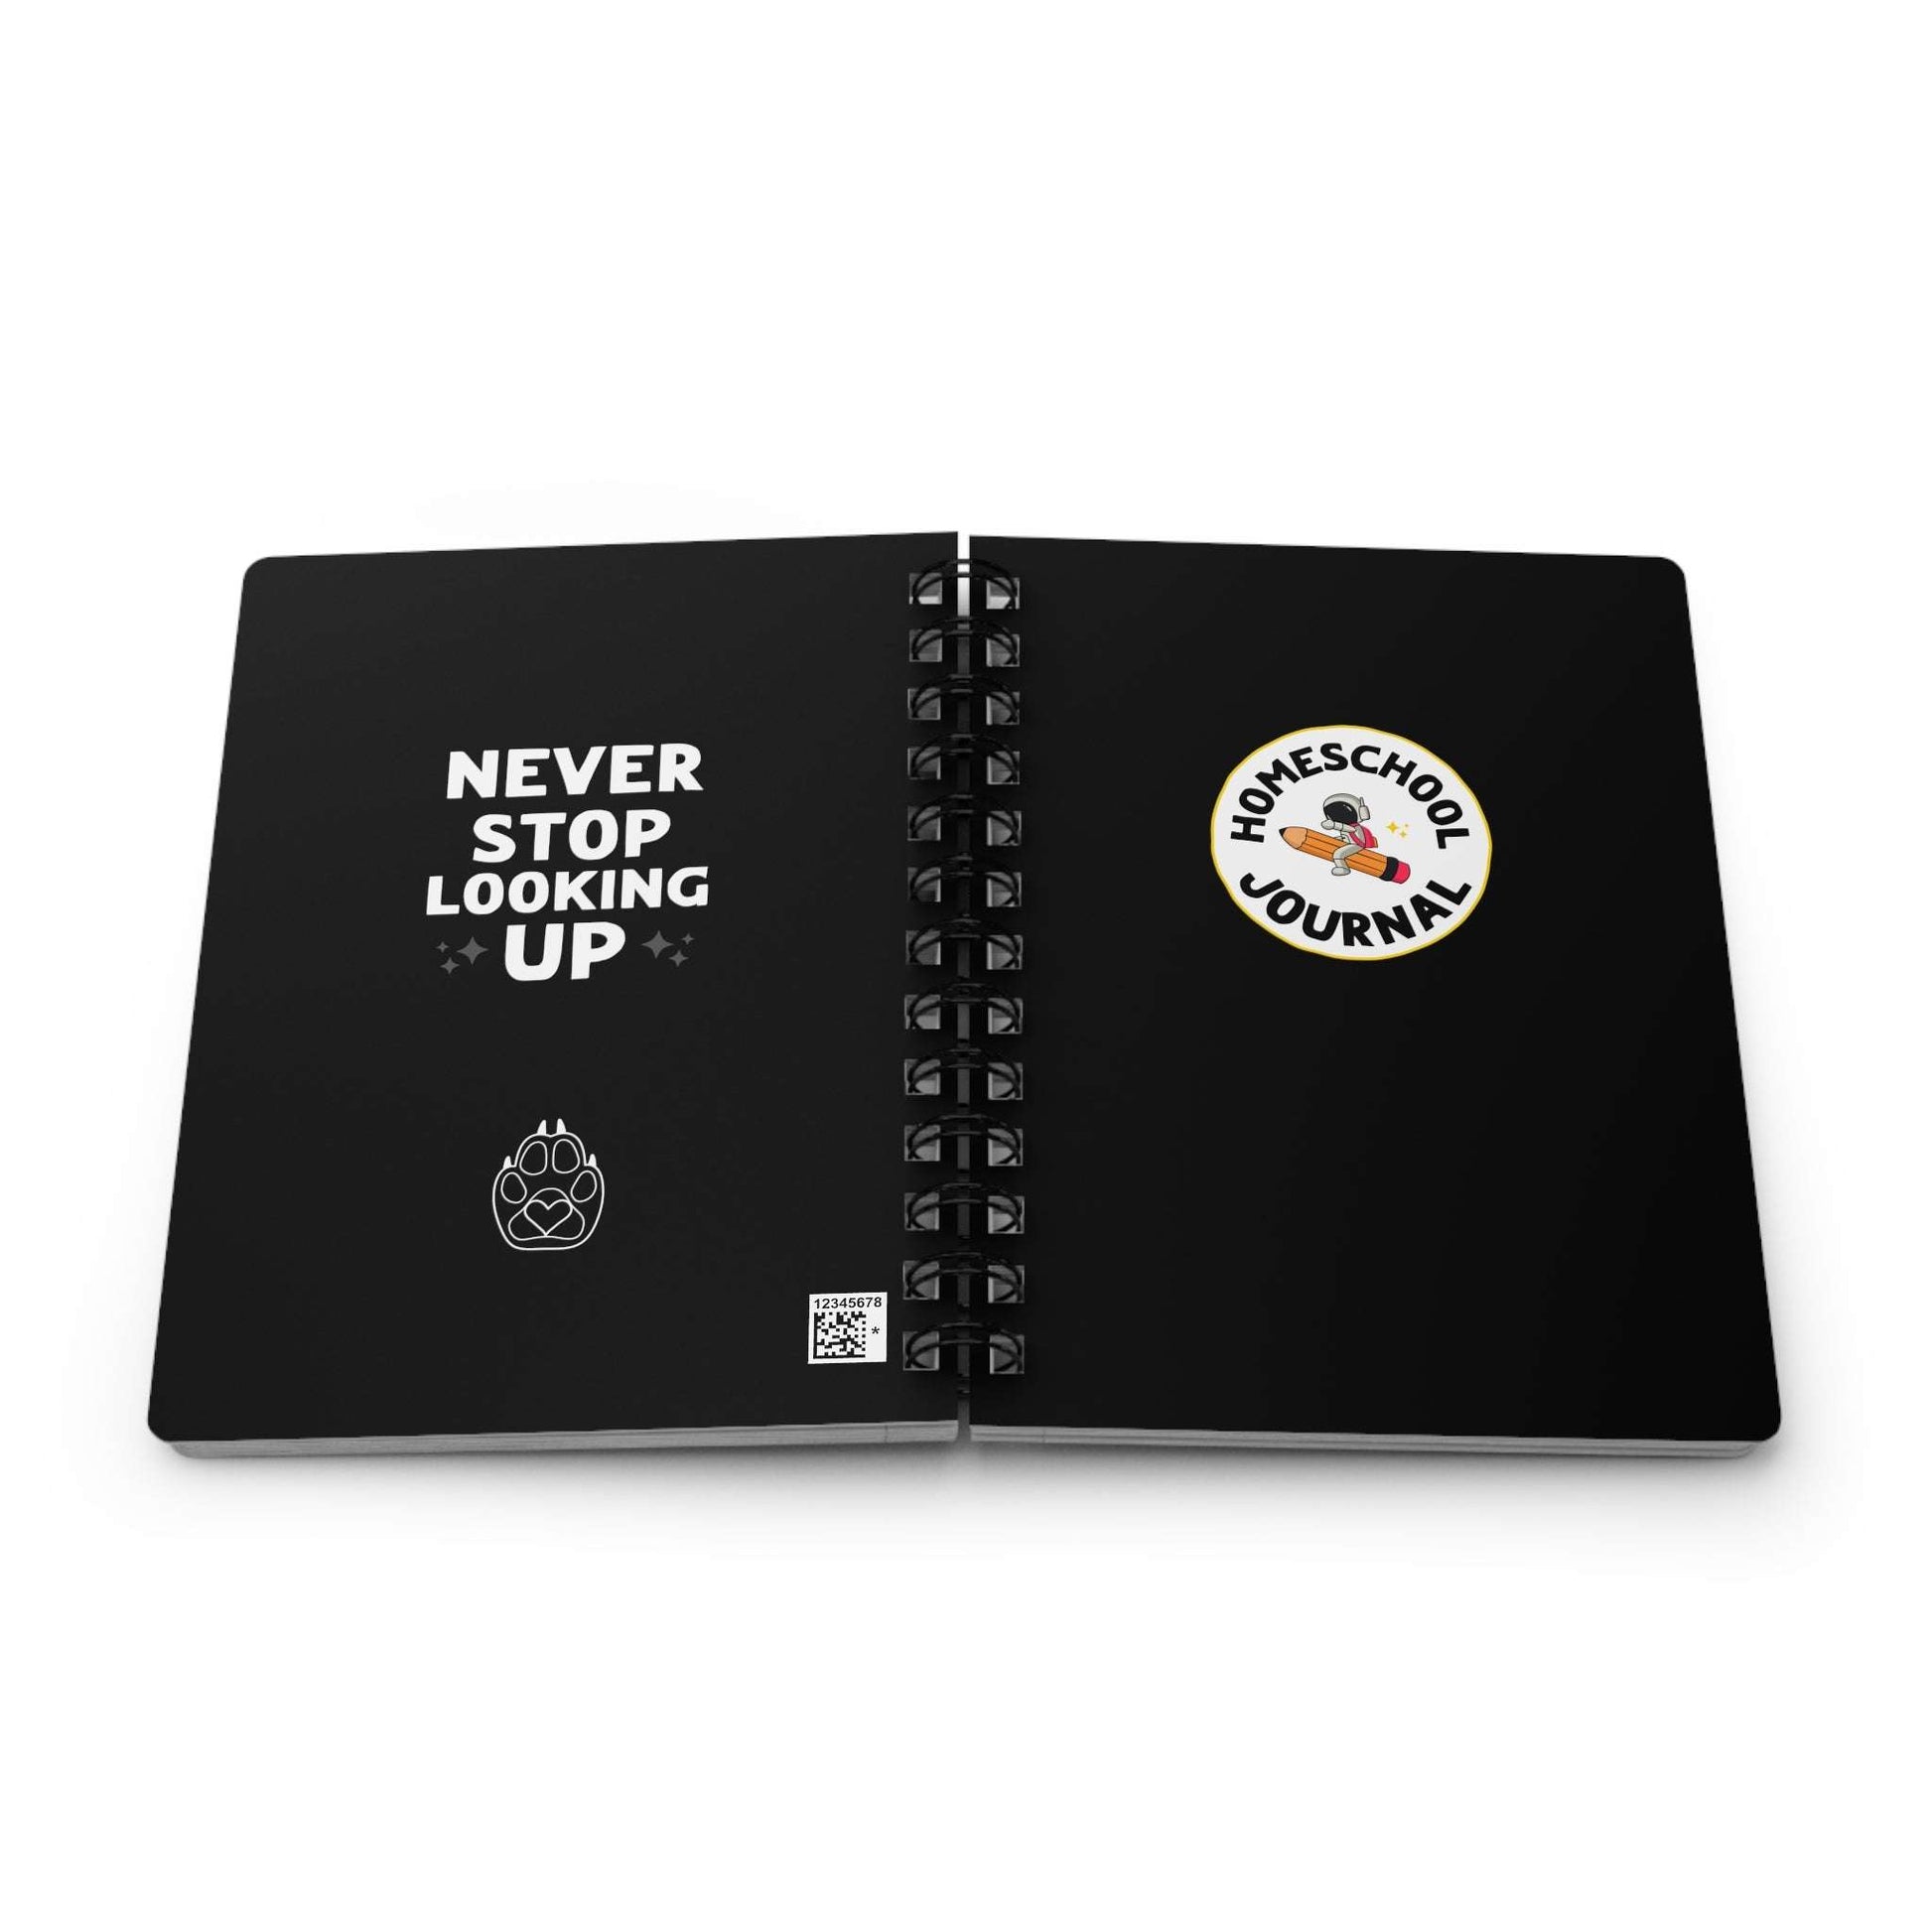 Astronaut Homeschool Spiral Bound JournalWolfe Paw DesignsAstronaut Homeschool Spiral Bound JournalBlack  - Astronaut Homeschool lined journal 
Your homeschooler can now write in style with our themed lined journals made for kids just like yours!
Each color has itAstronaut Homeschool Spiral Bound Journal